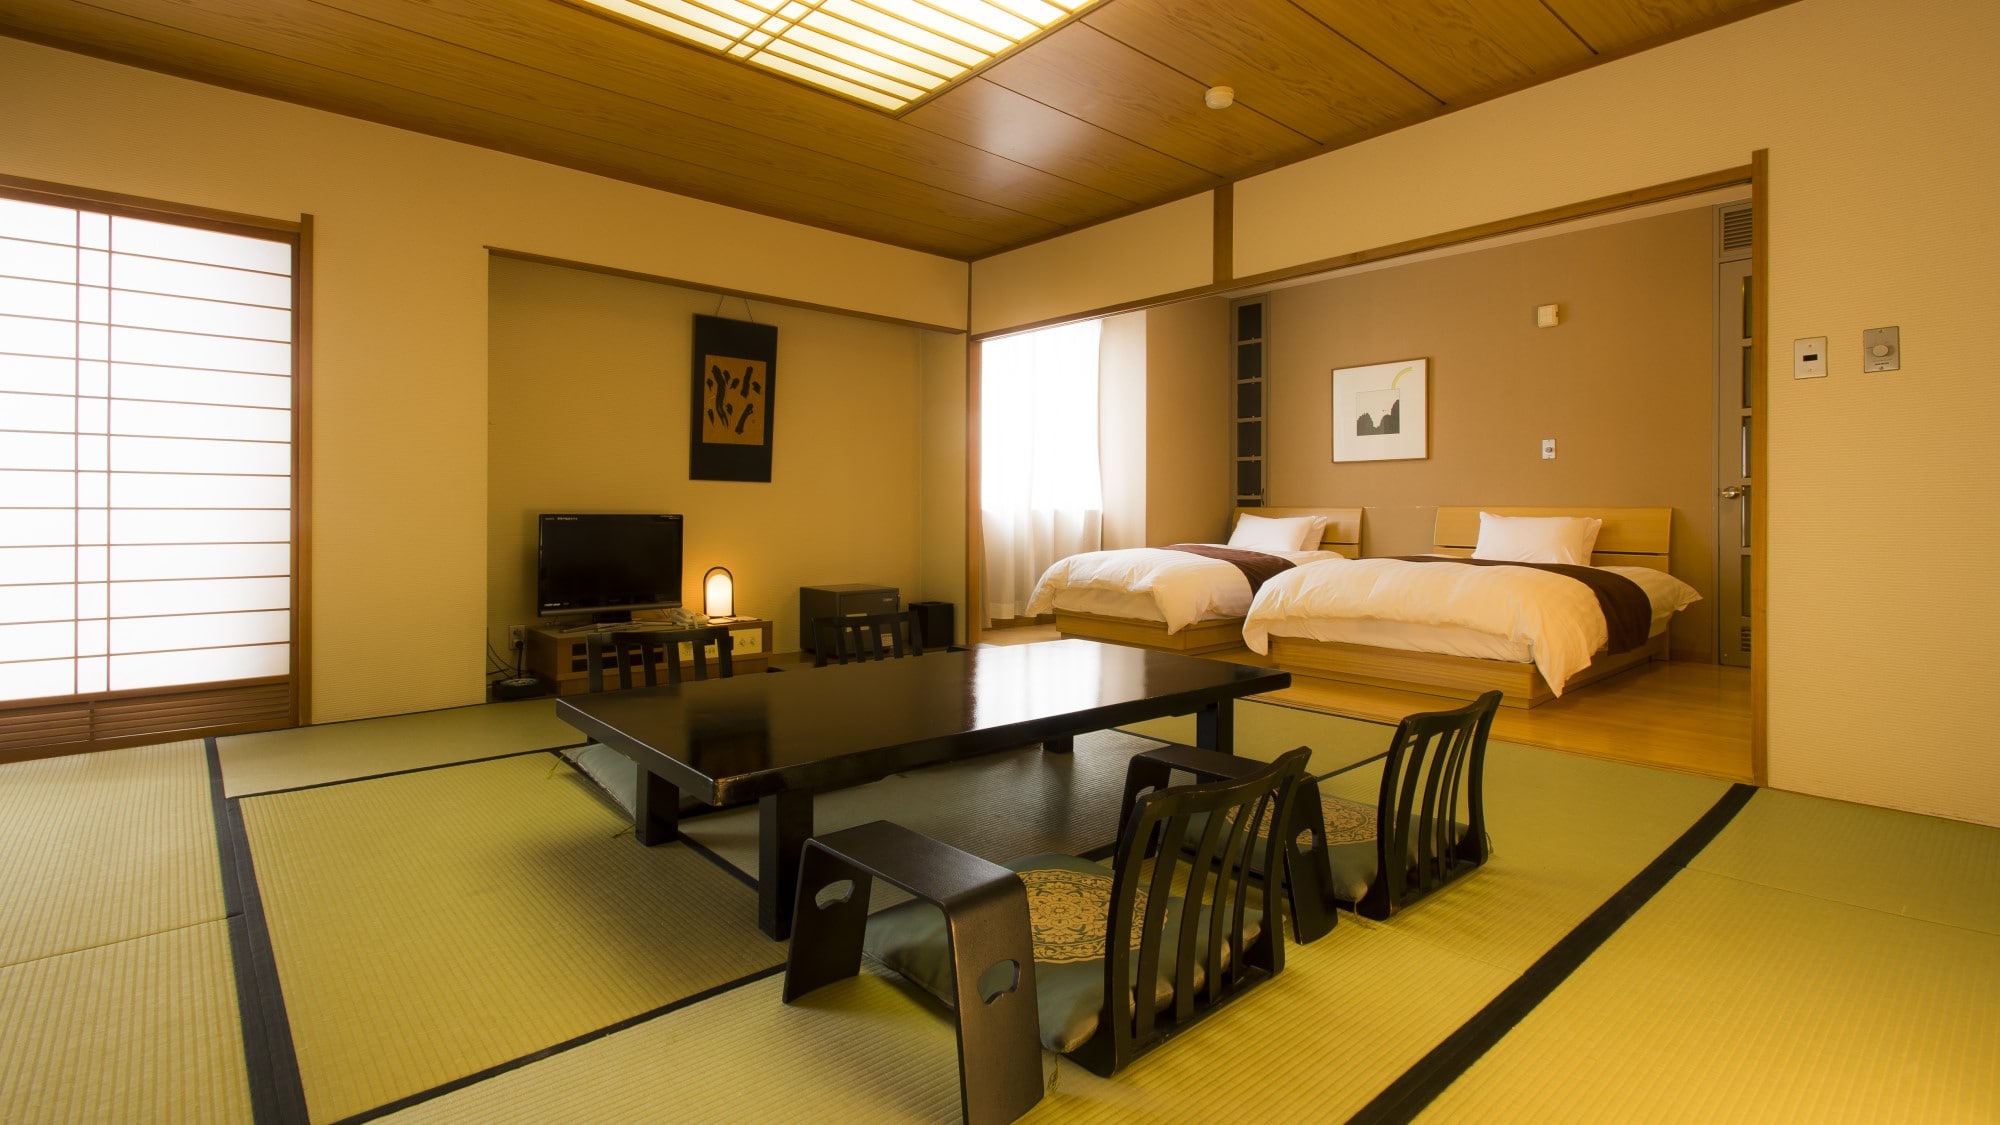 ☆ An example of a Japanese and Western room in the East Building